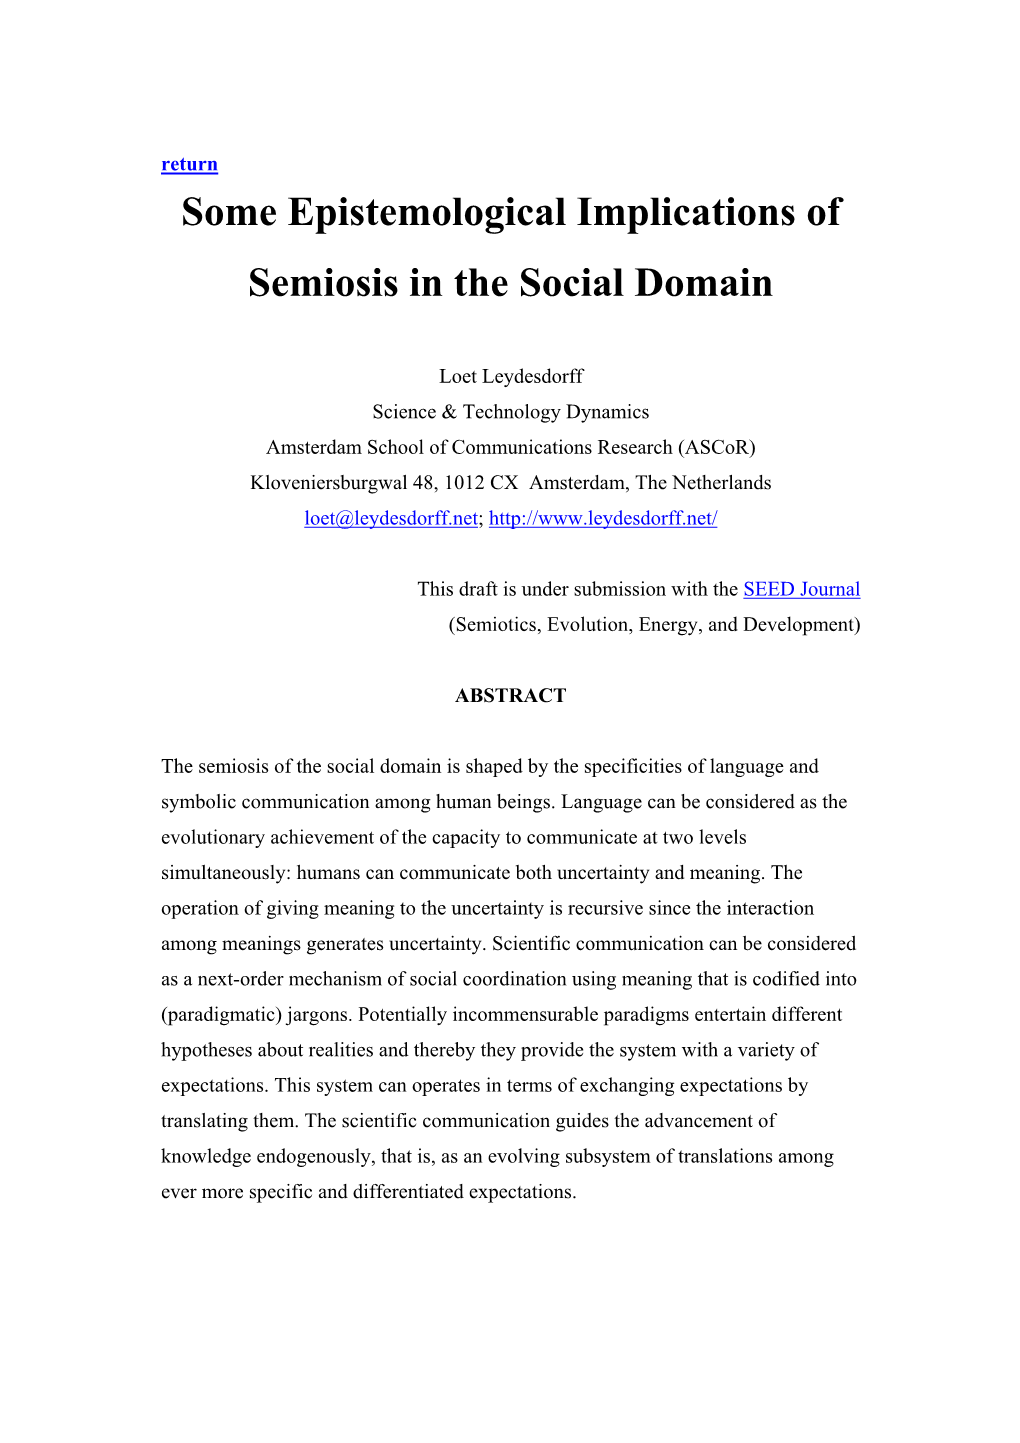 The Specificity of Semiosis in the Social Domain